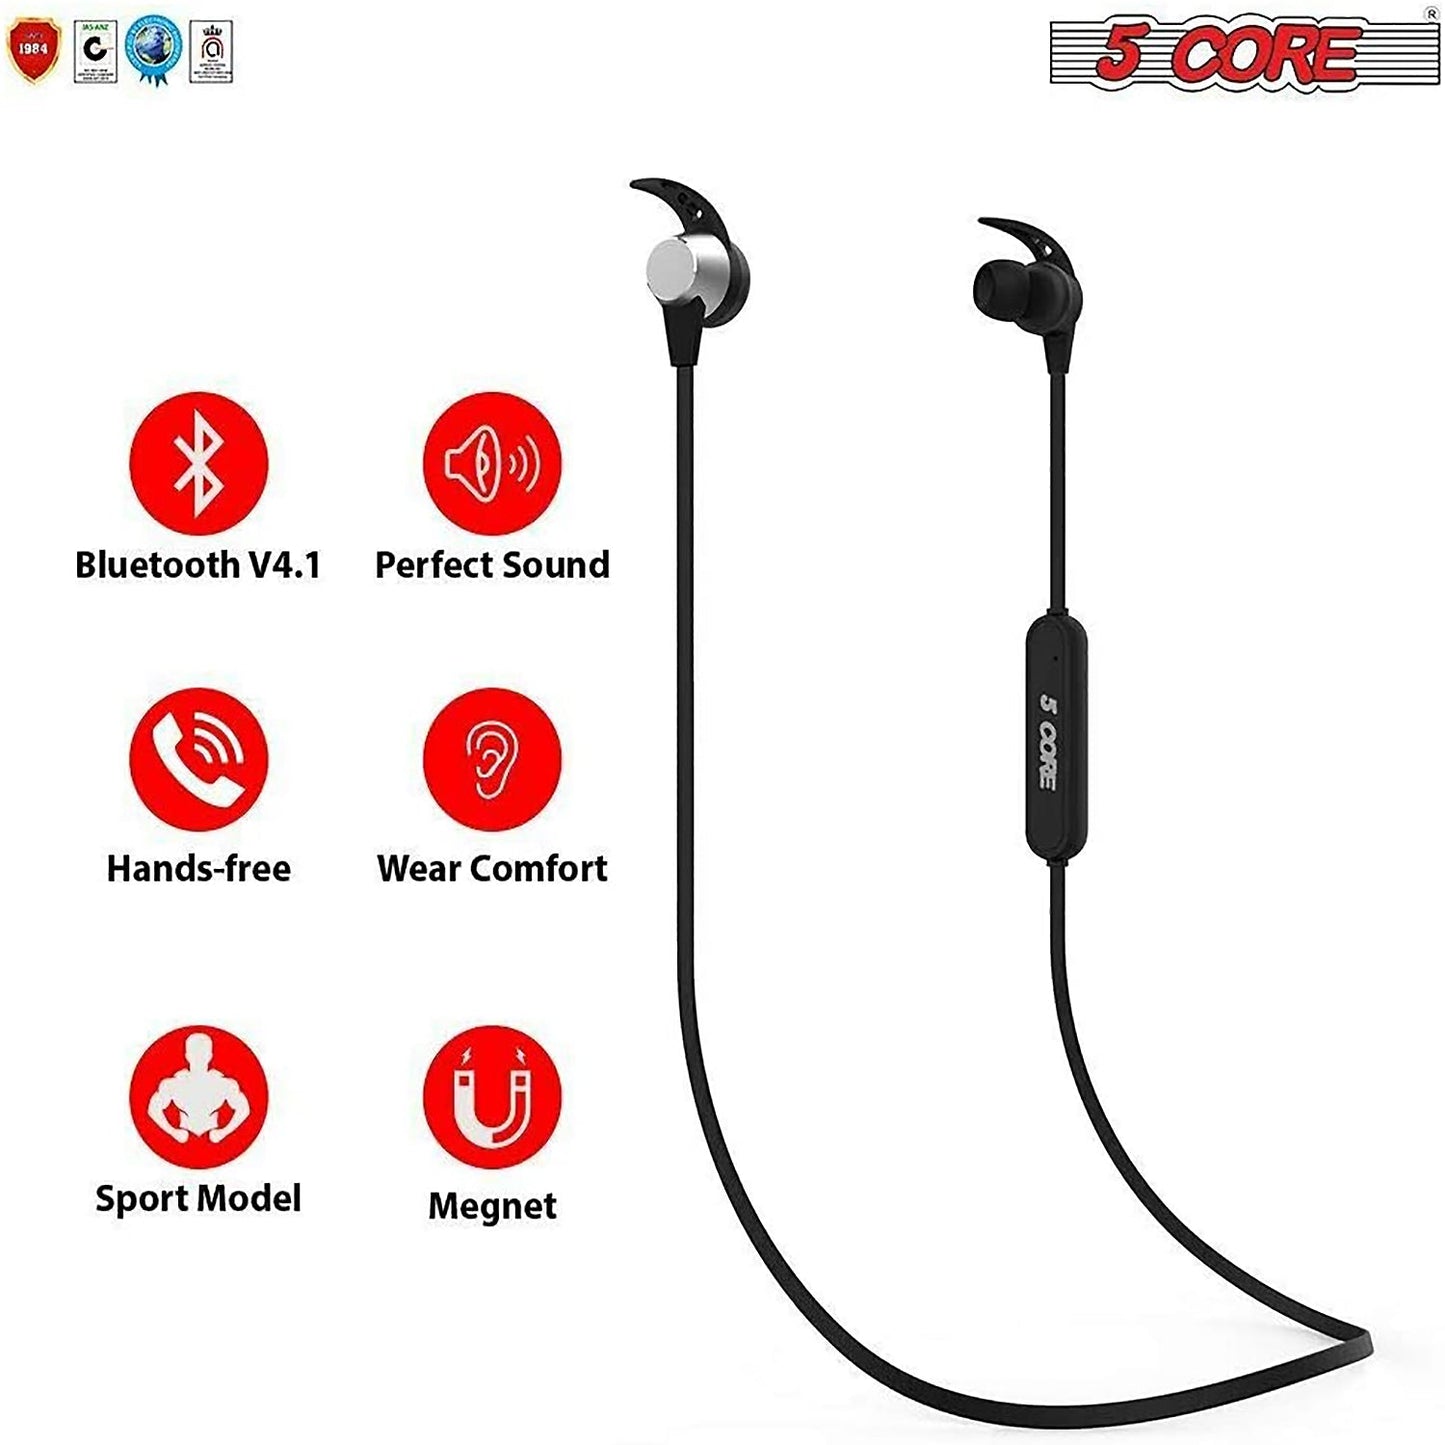 5 CORE Premium Bluetooth Earbuds Neckband Magnetic Bluetooth